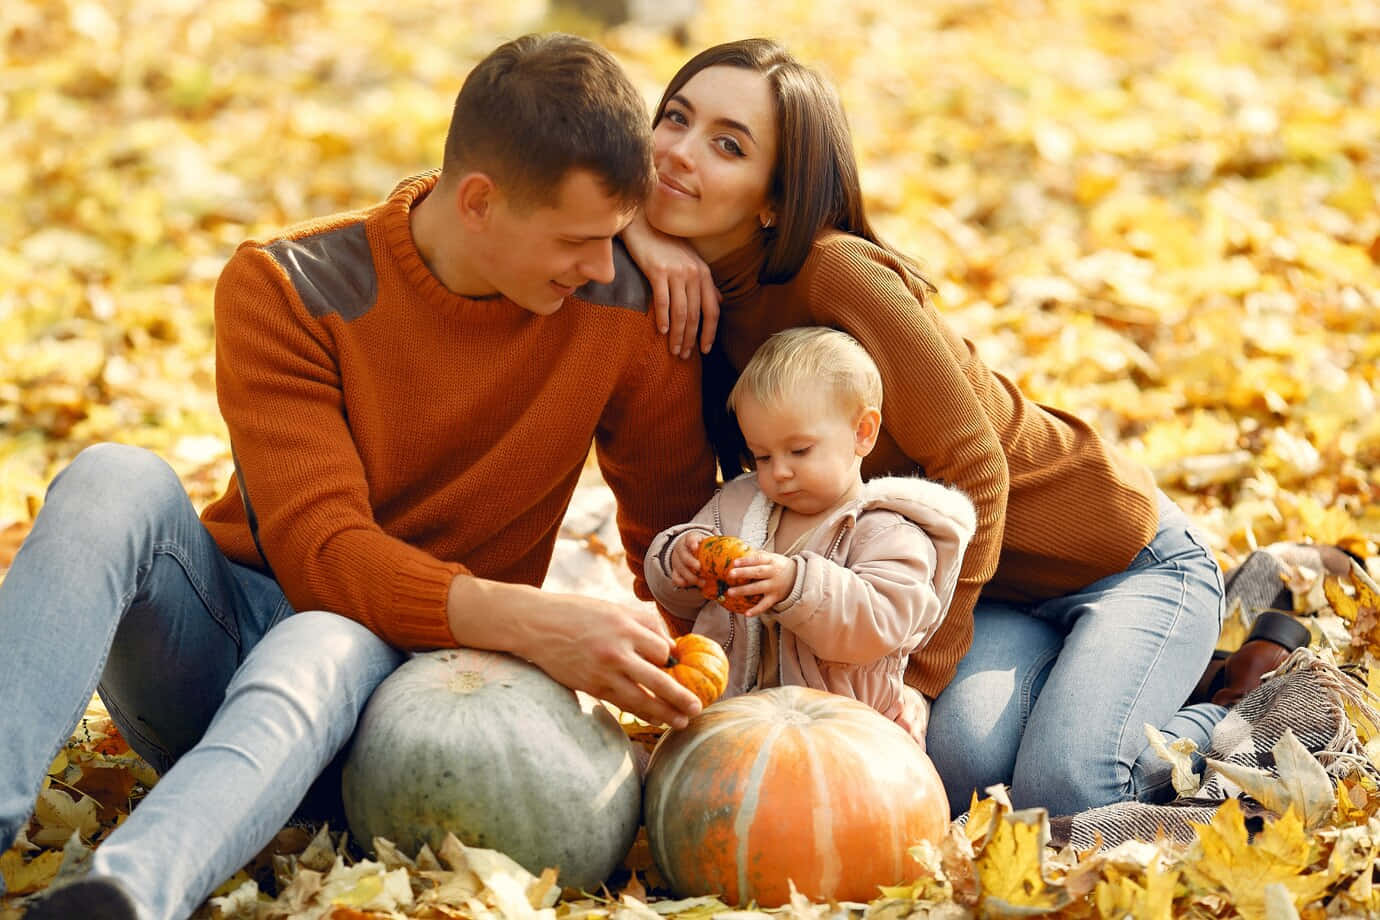 Celebrate fall together with this sweet family portrait